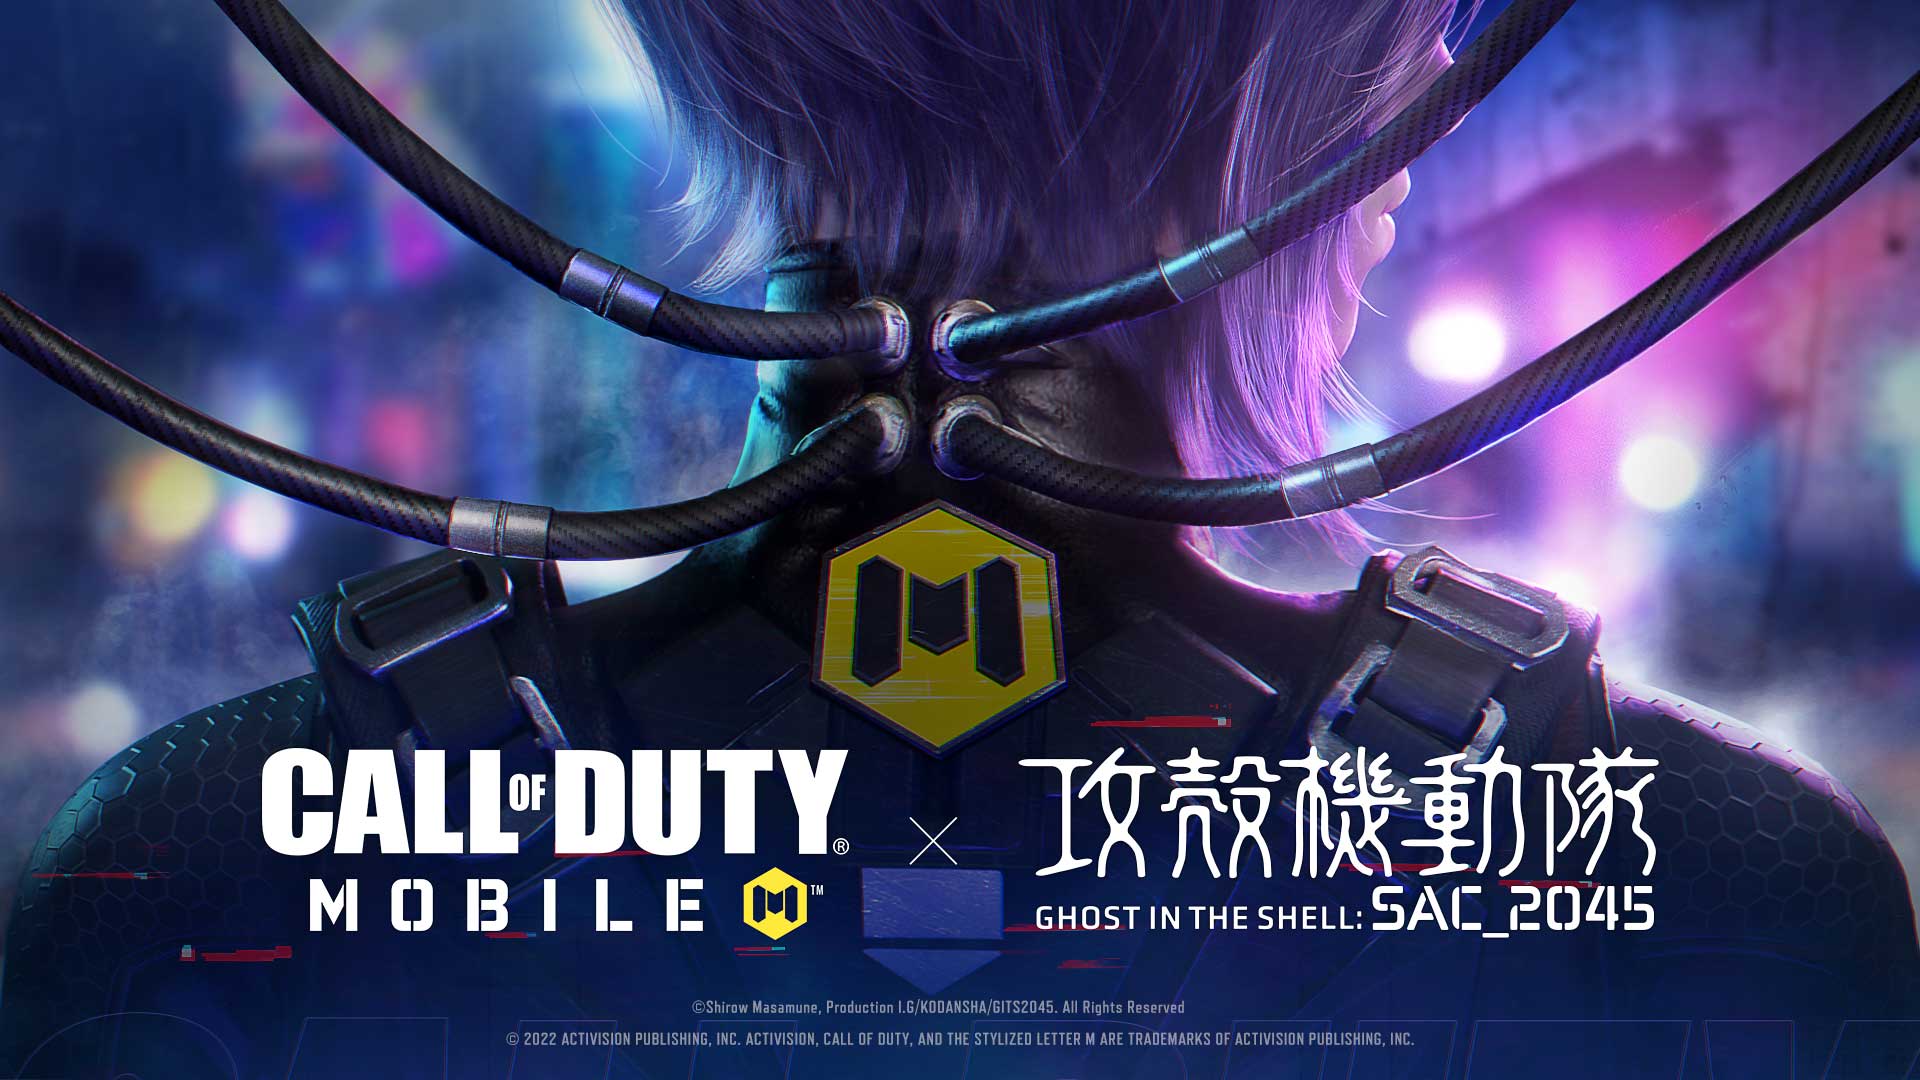 Ghost in the Shell: SAC_2045 Comes to Call of Duty®: Mobile in Season 7